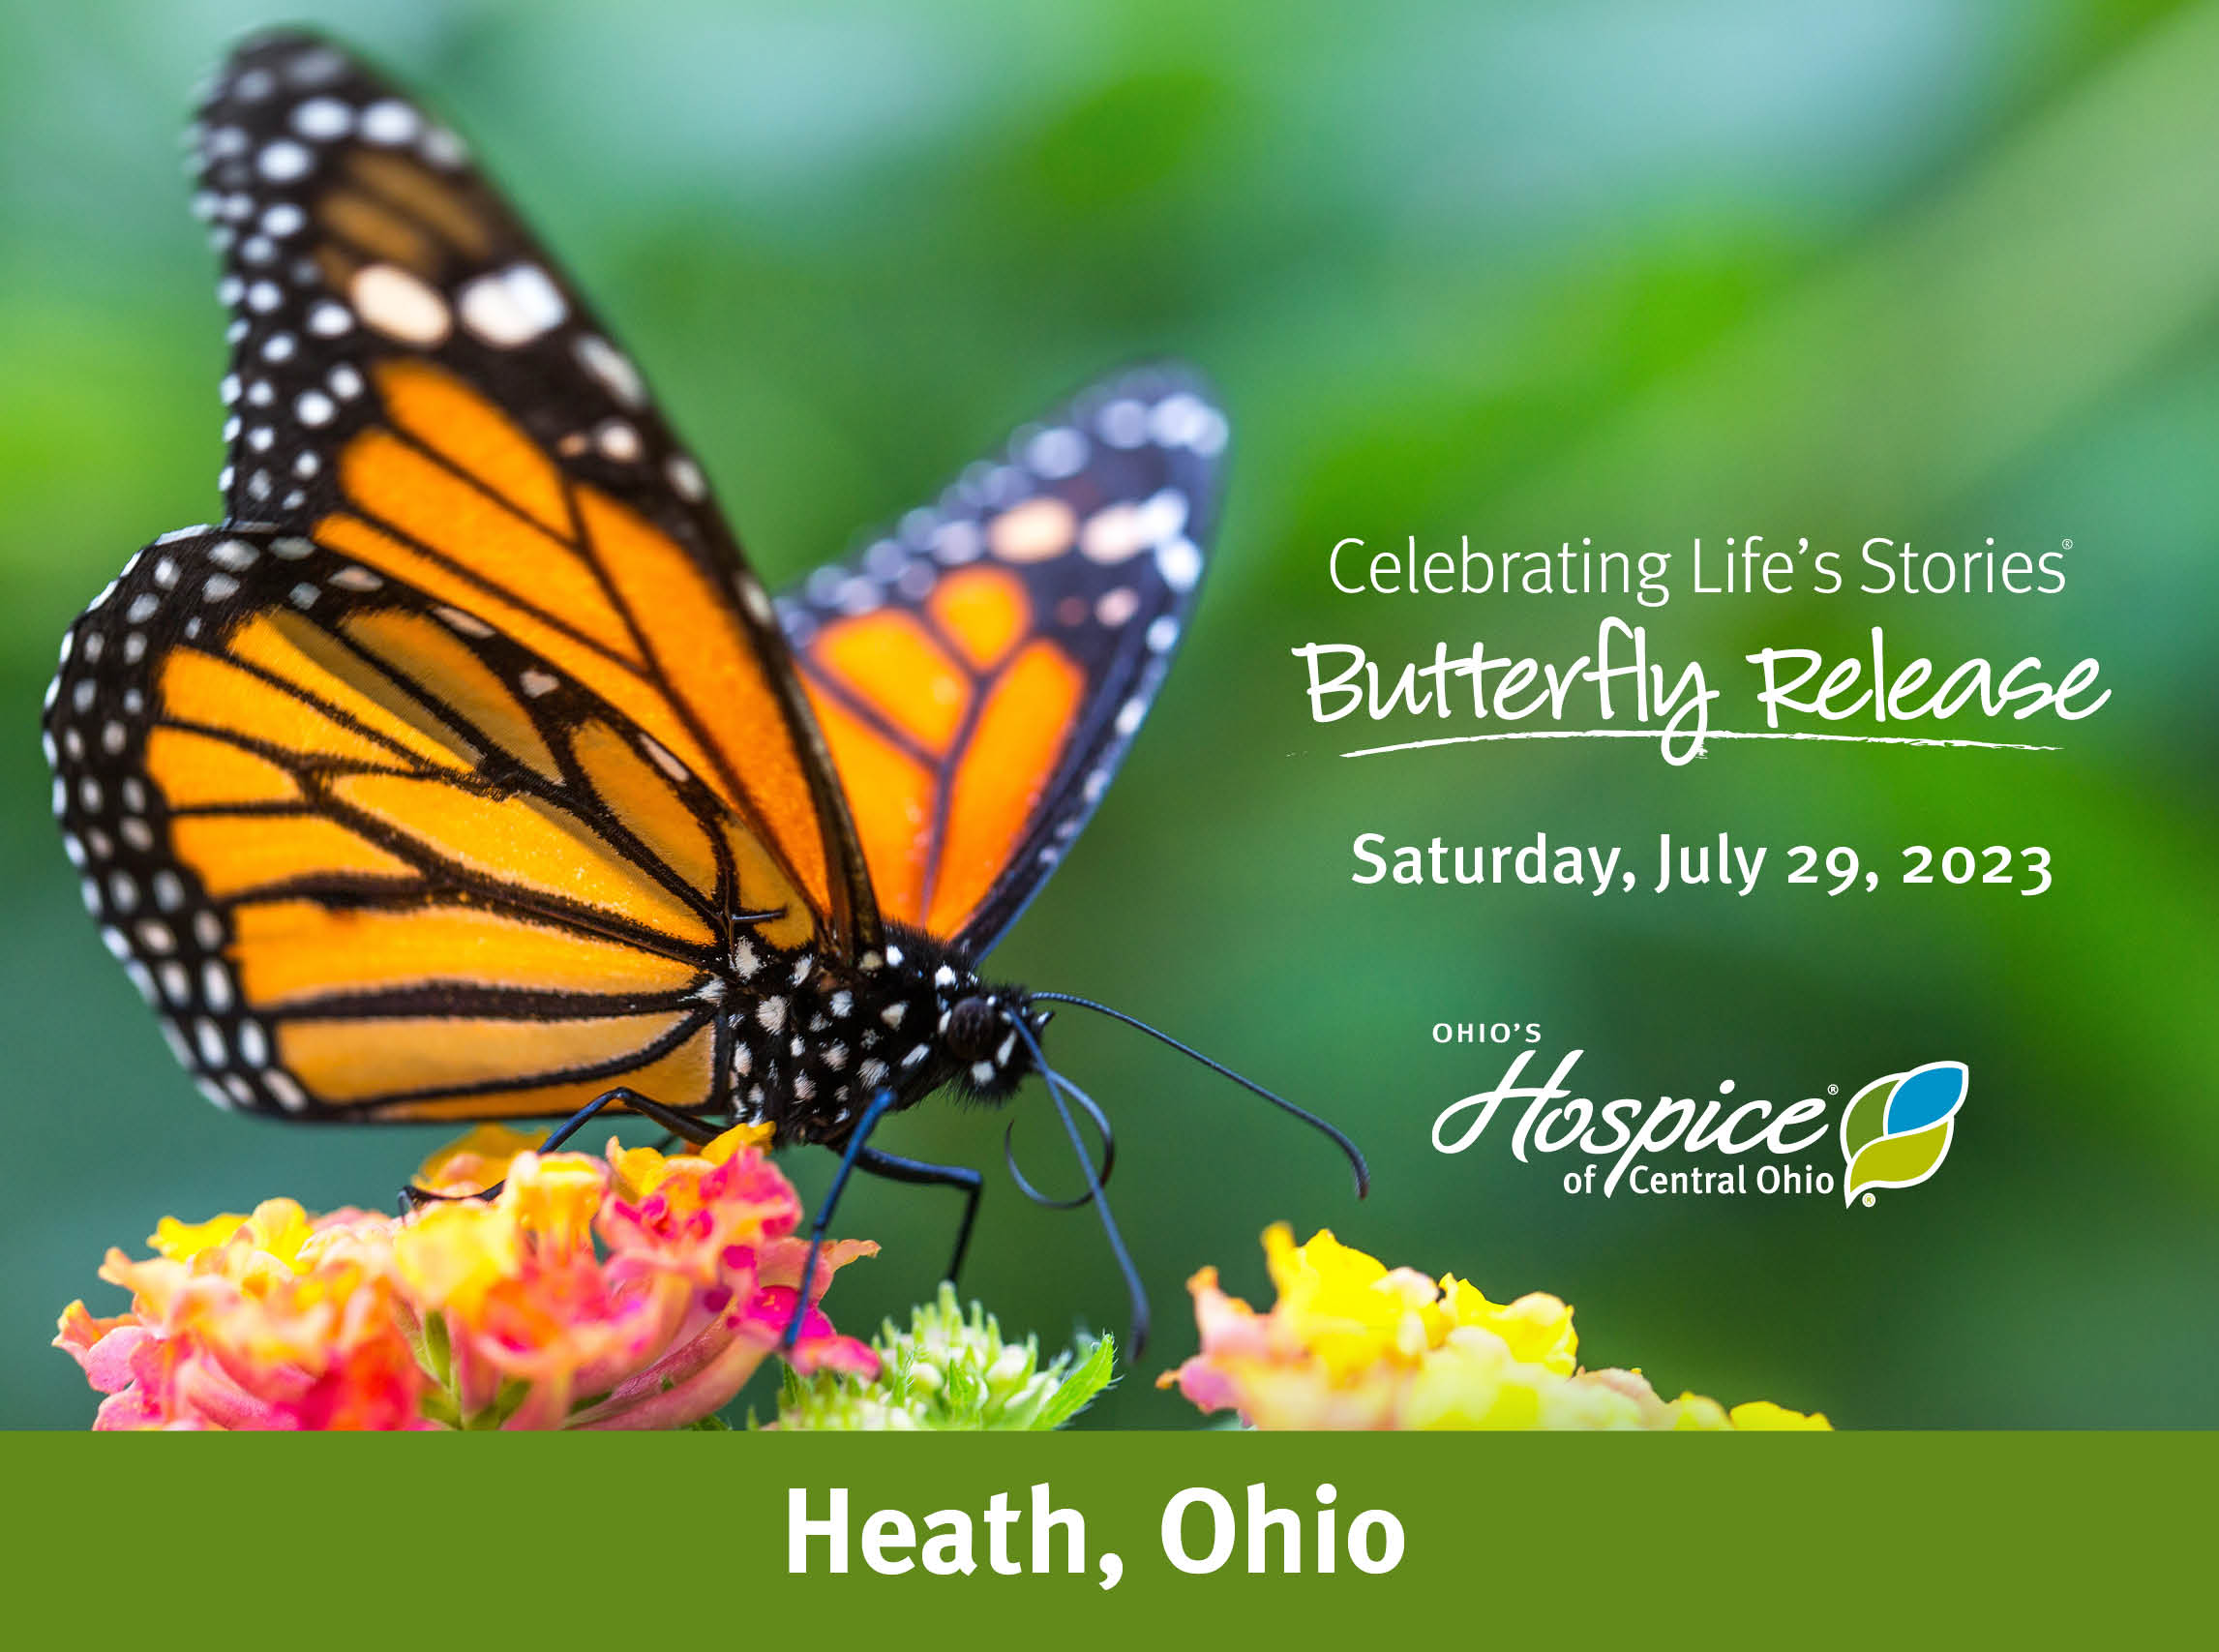 Celebrating Life's Stories Butterfly Release, Saturday, July 29, 2023, Ohio's Hospice of Central Ohio, Heath, Ohio